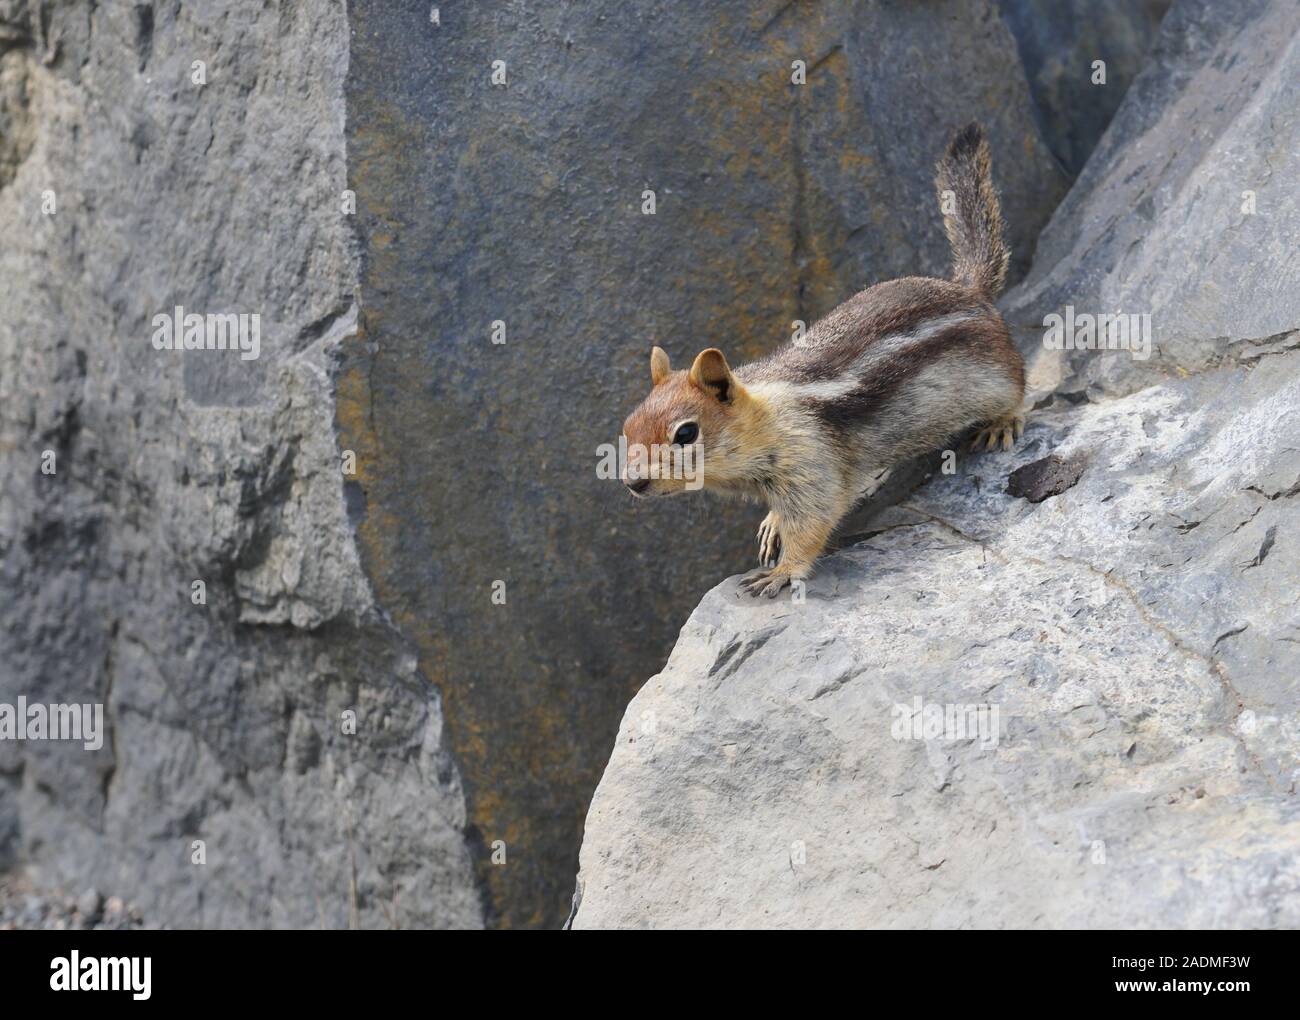 A small chipmunk is playing among the lave boulders in one of Central Oregon's lava fields. Stock Photo